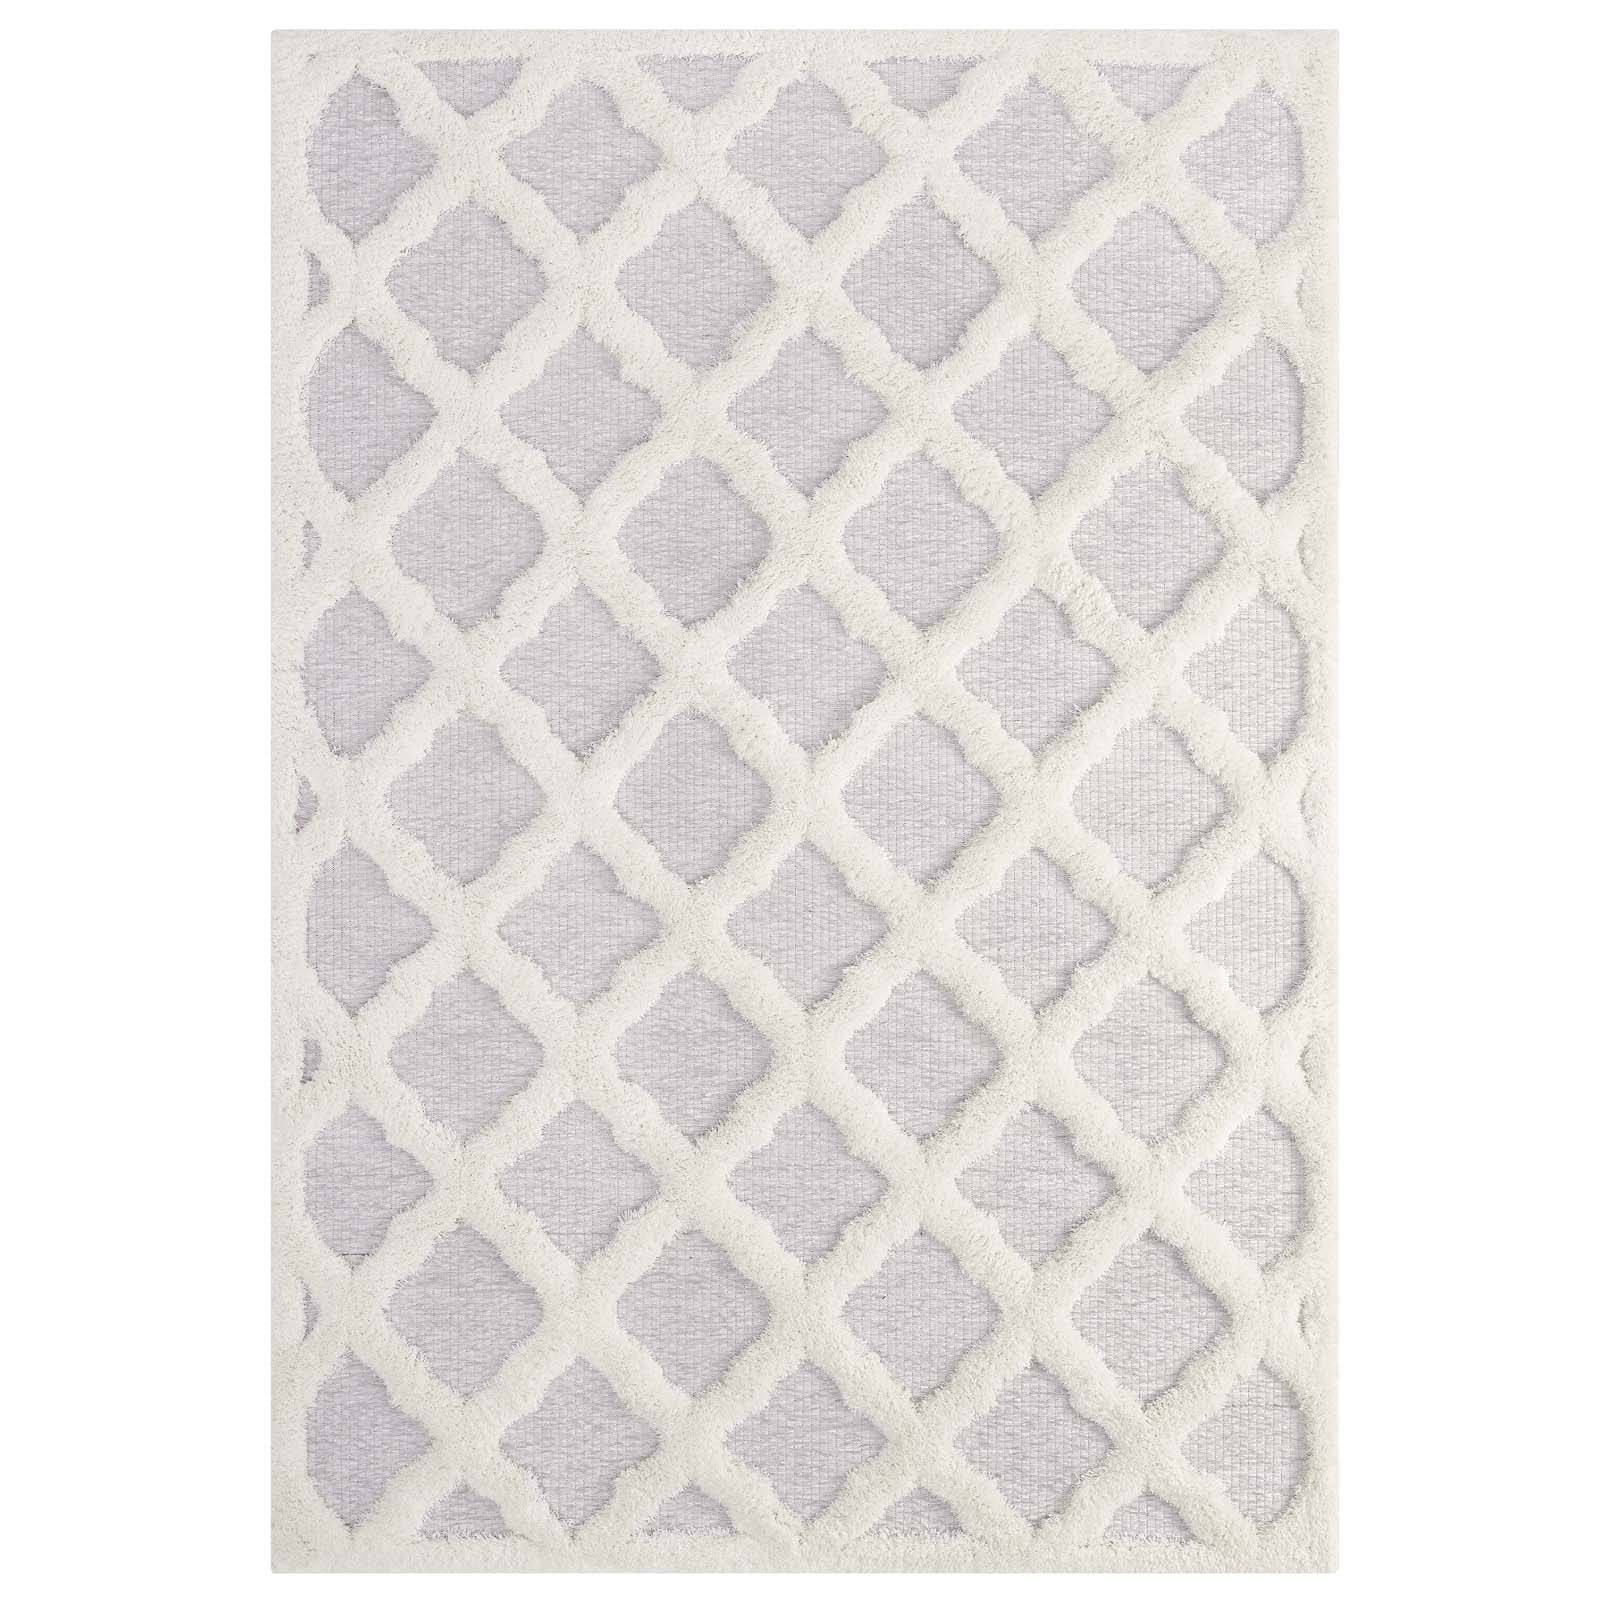 Modway Indoor Rugs - Whimsical Regale Abstract Moroccan Trellis 5x8 Shag Area Rug Ivory & Light Gray